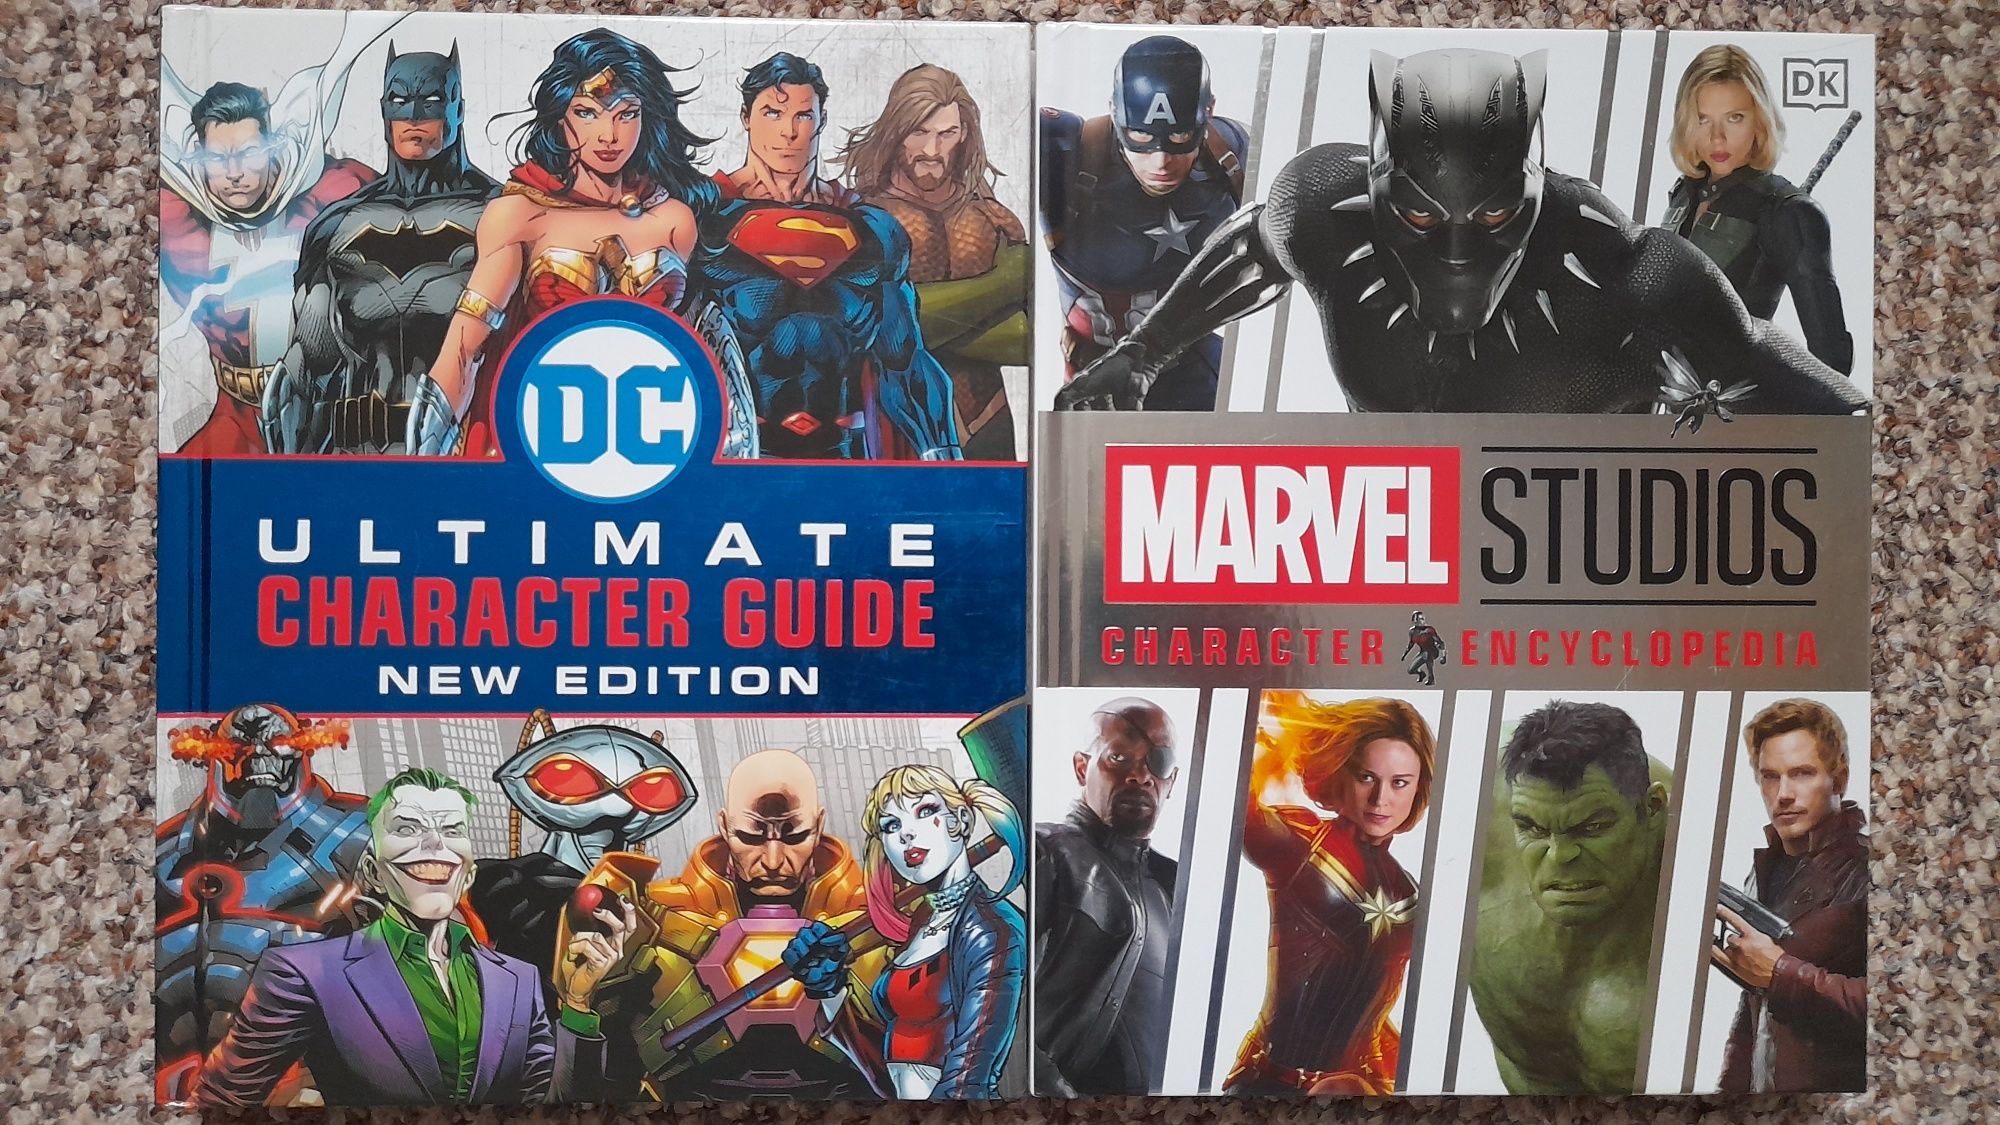 DC Ultimate Character Guide, Marvel Character Encyclopedia, angielski